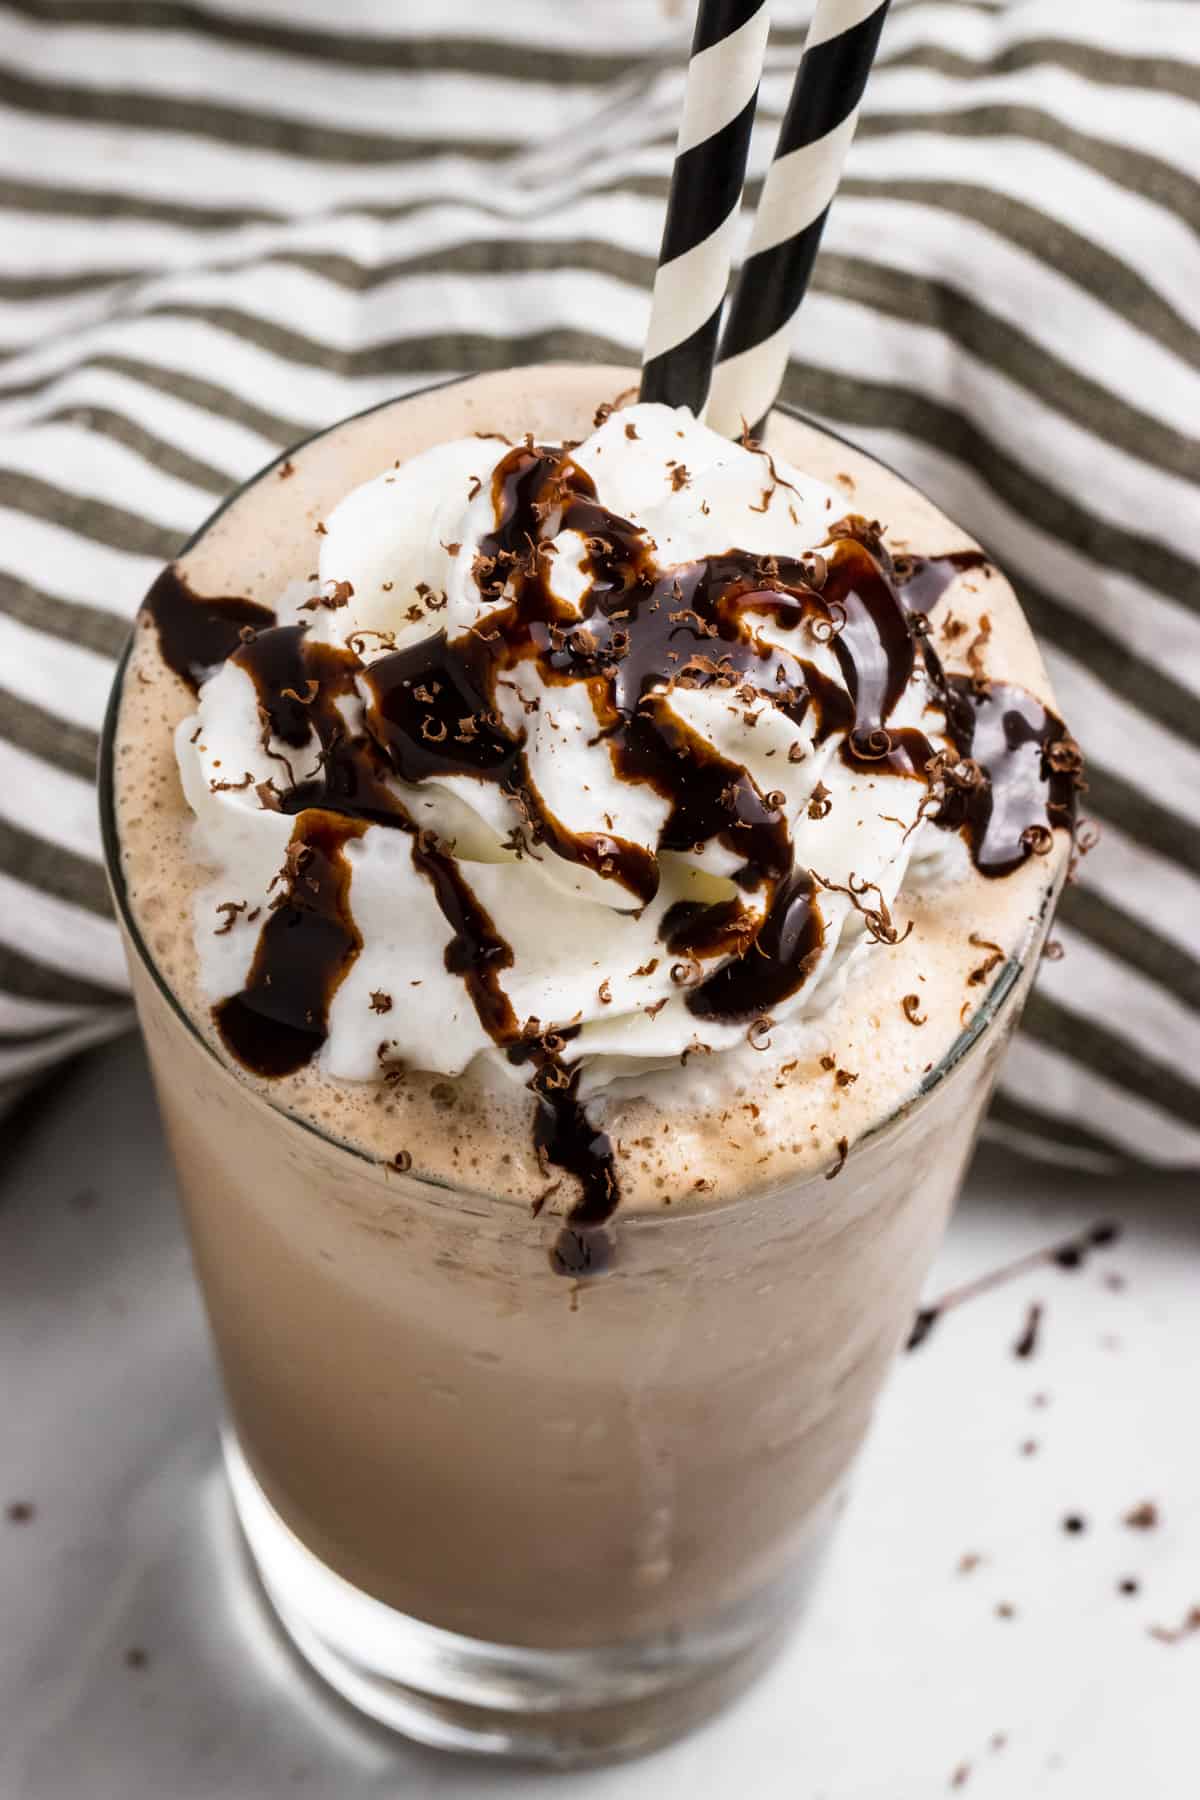 Homemade mocha frappuccino in glass with whipped cream.